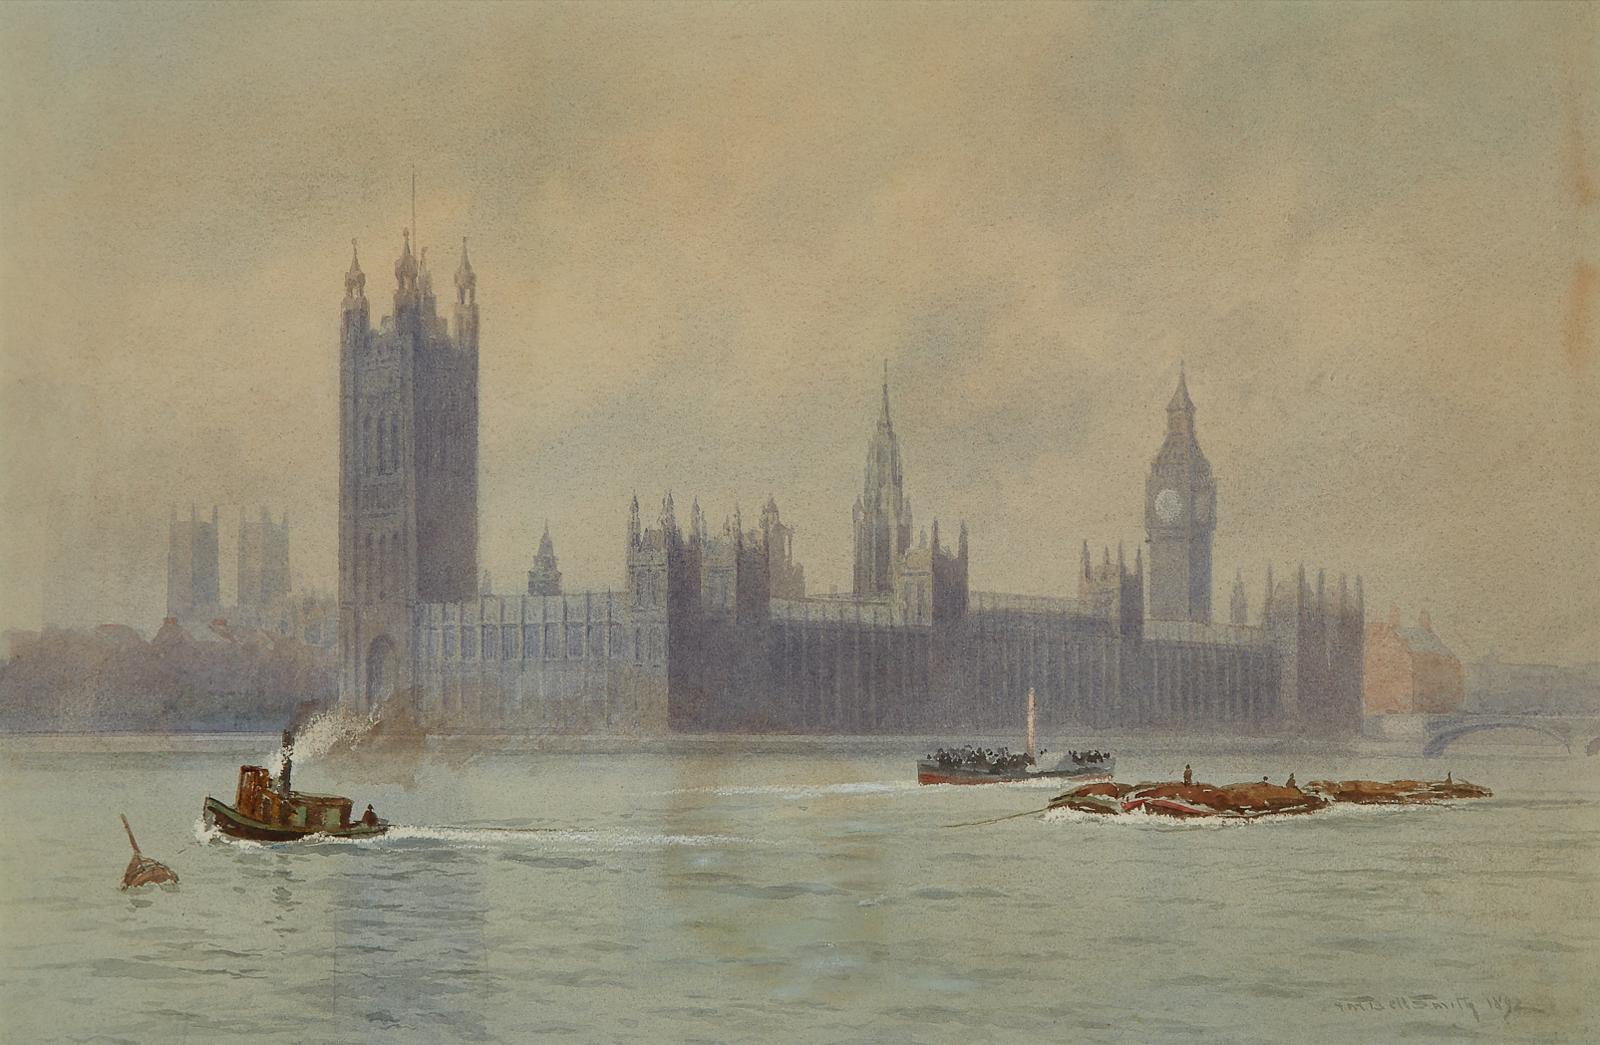 Frederic Martlett Bell-Smith (1846-1923) - Palace Of Westminster, London, 1892